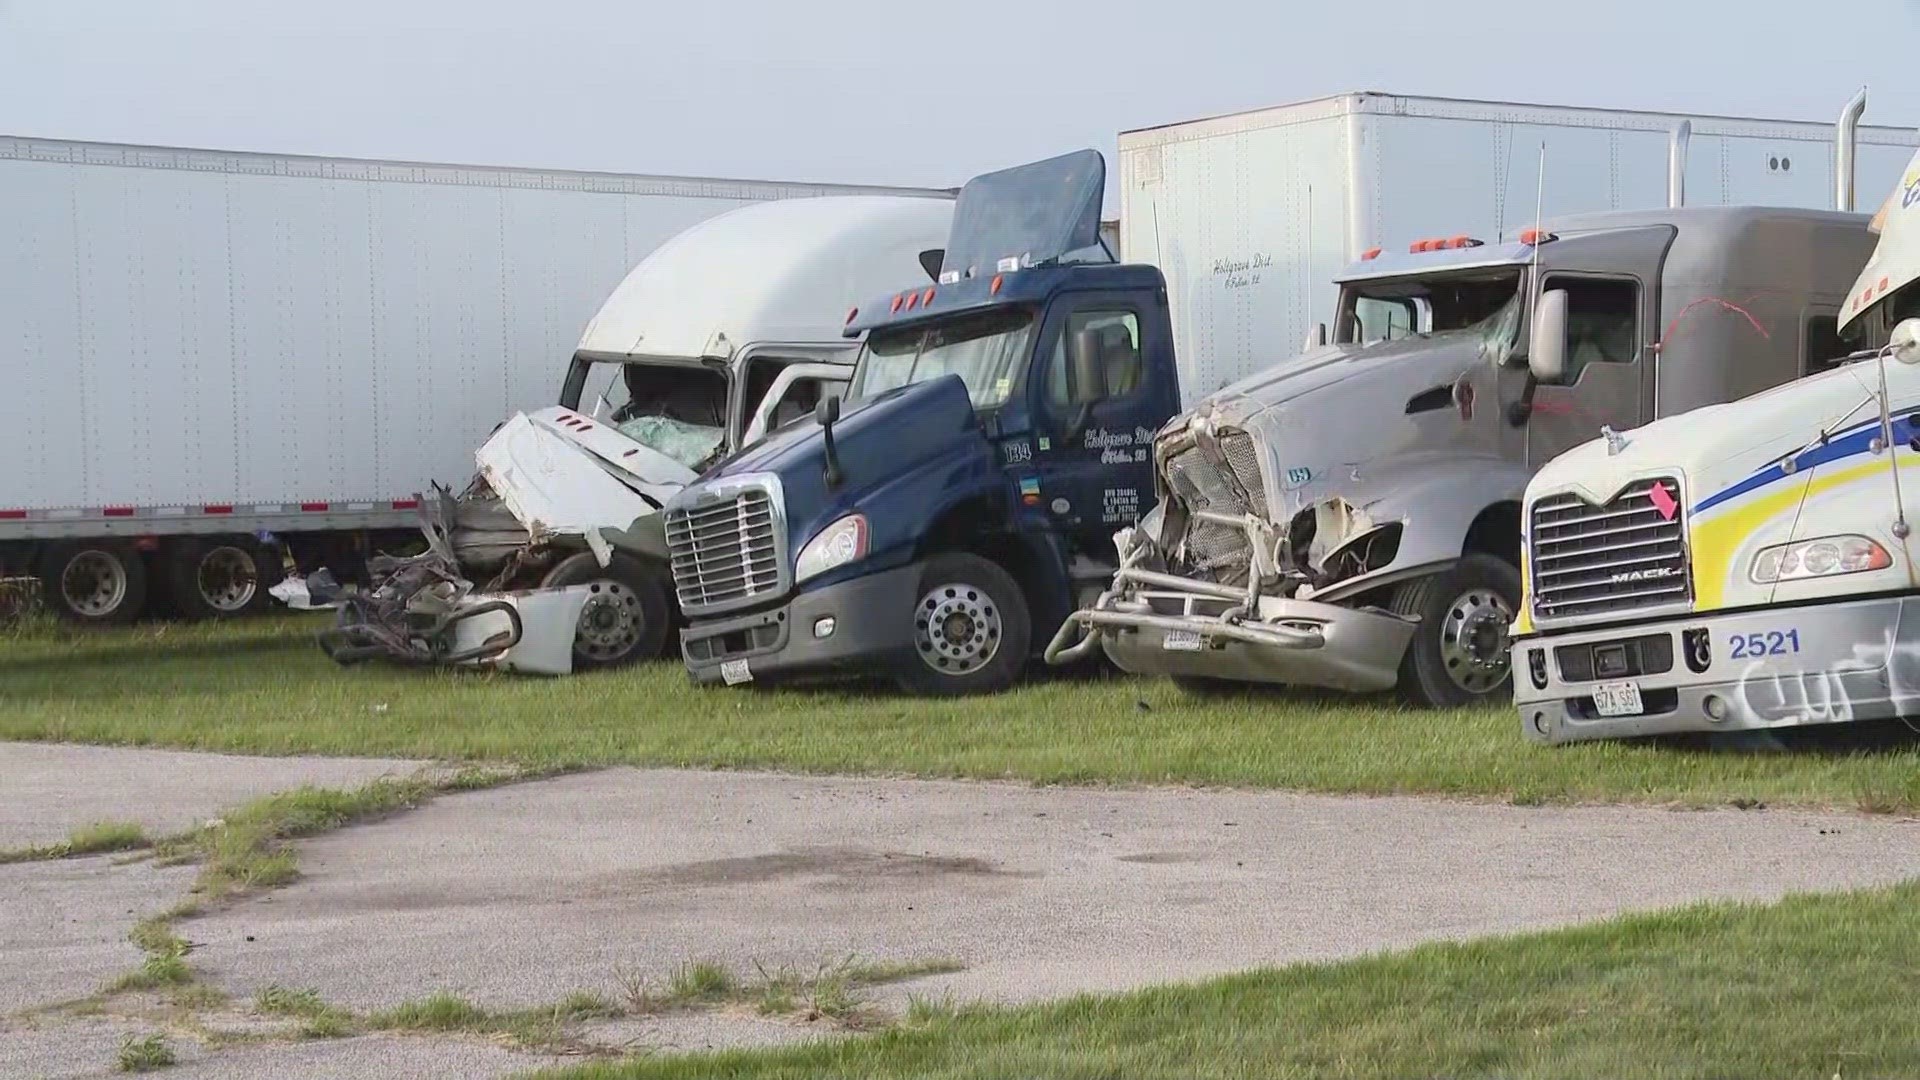 The Illinois State Police said the death toll of the dust storm crash on Interstate 55 increased to seven. The remains were found as the investigation continued.